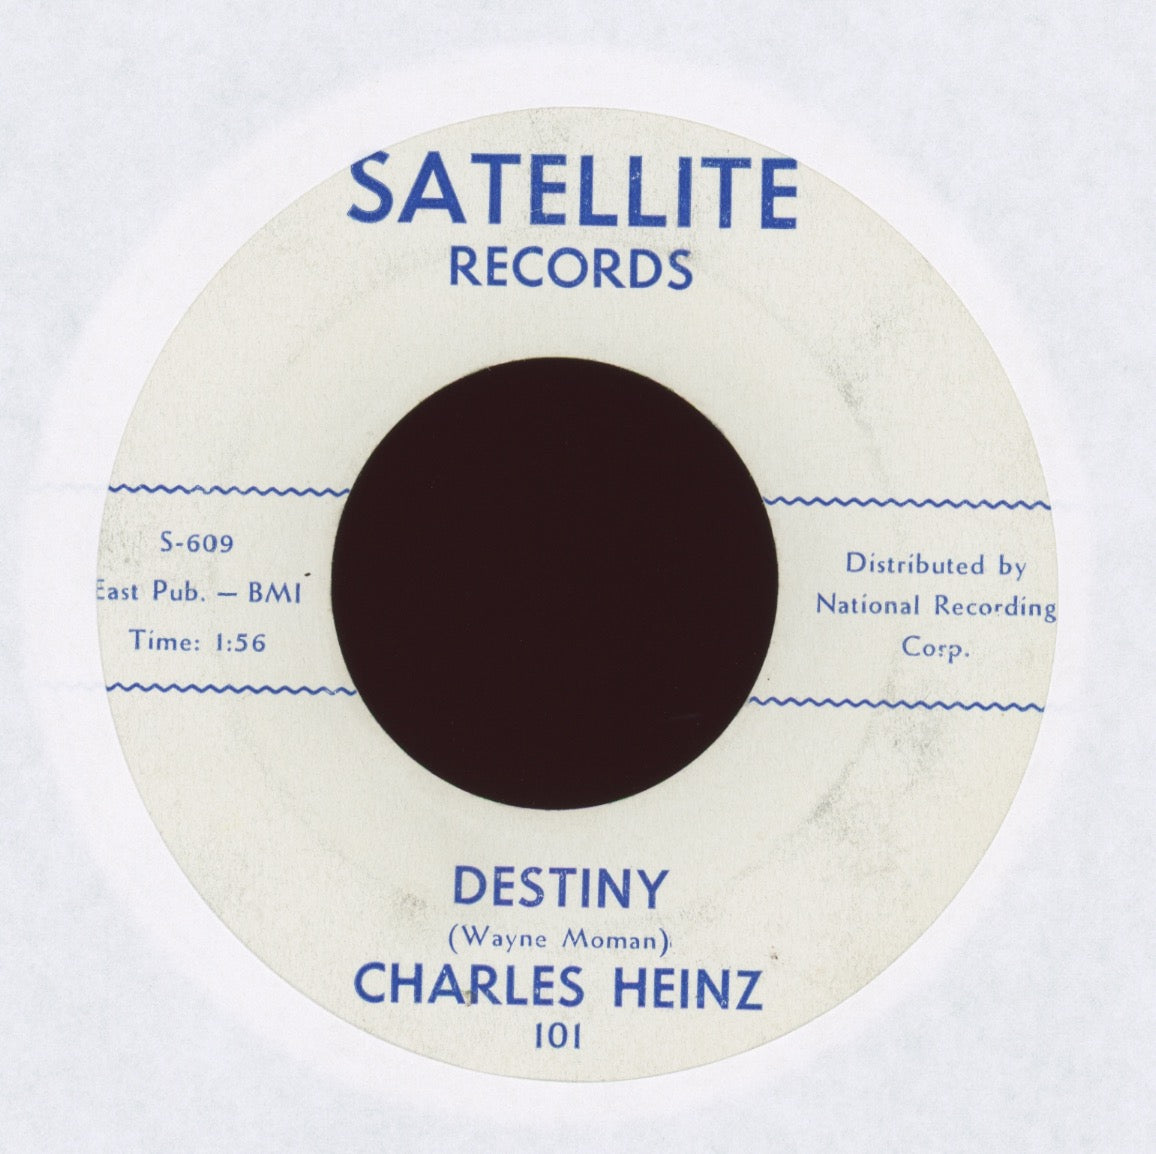 Charles Heinz - Prove Your Love on Satellite